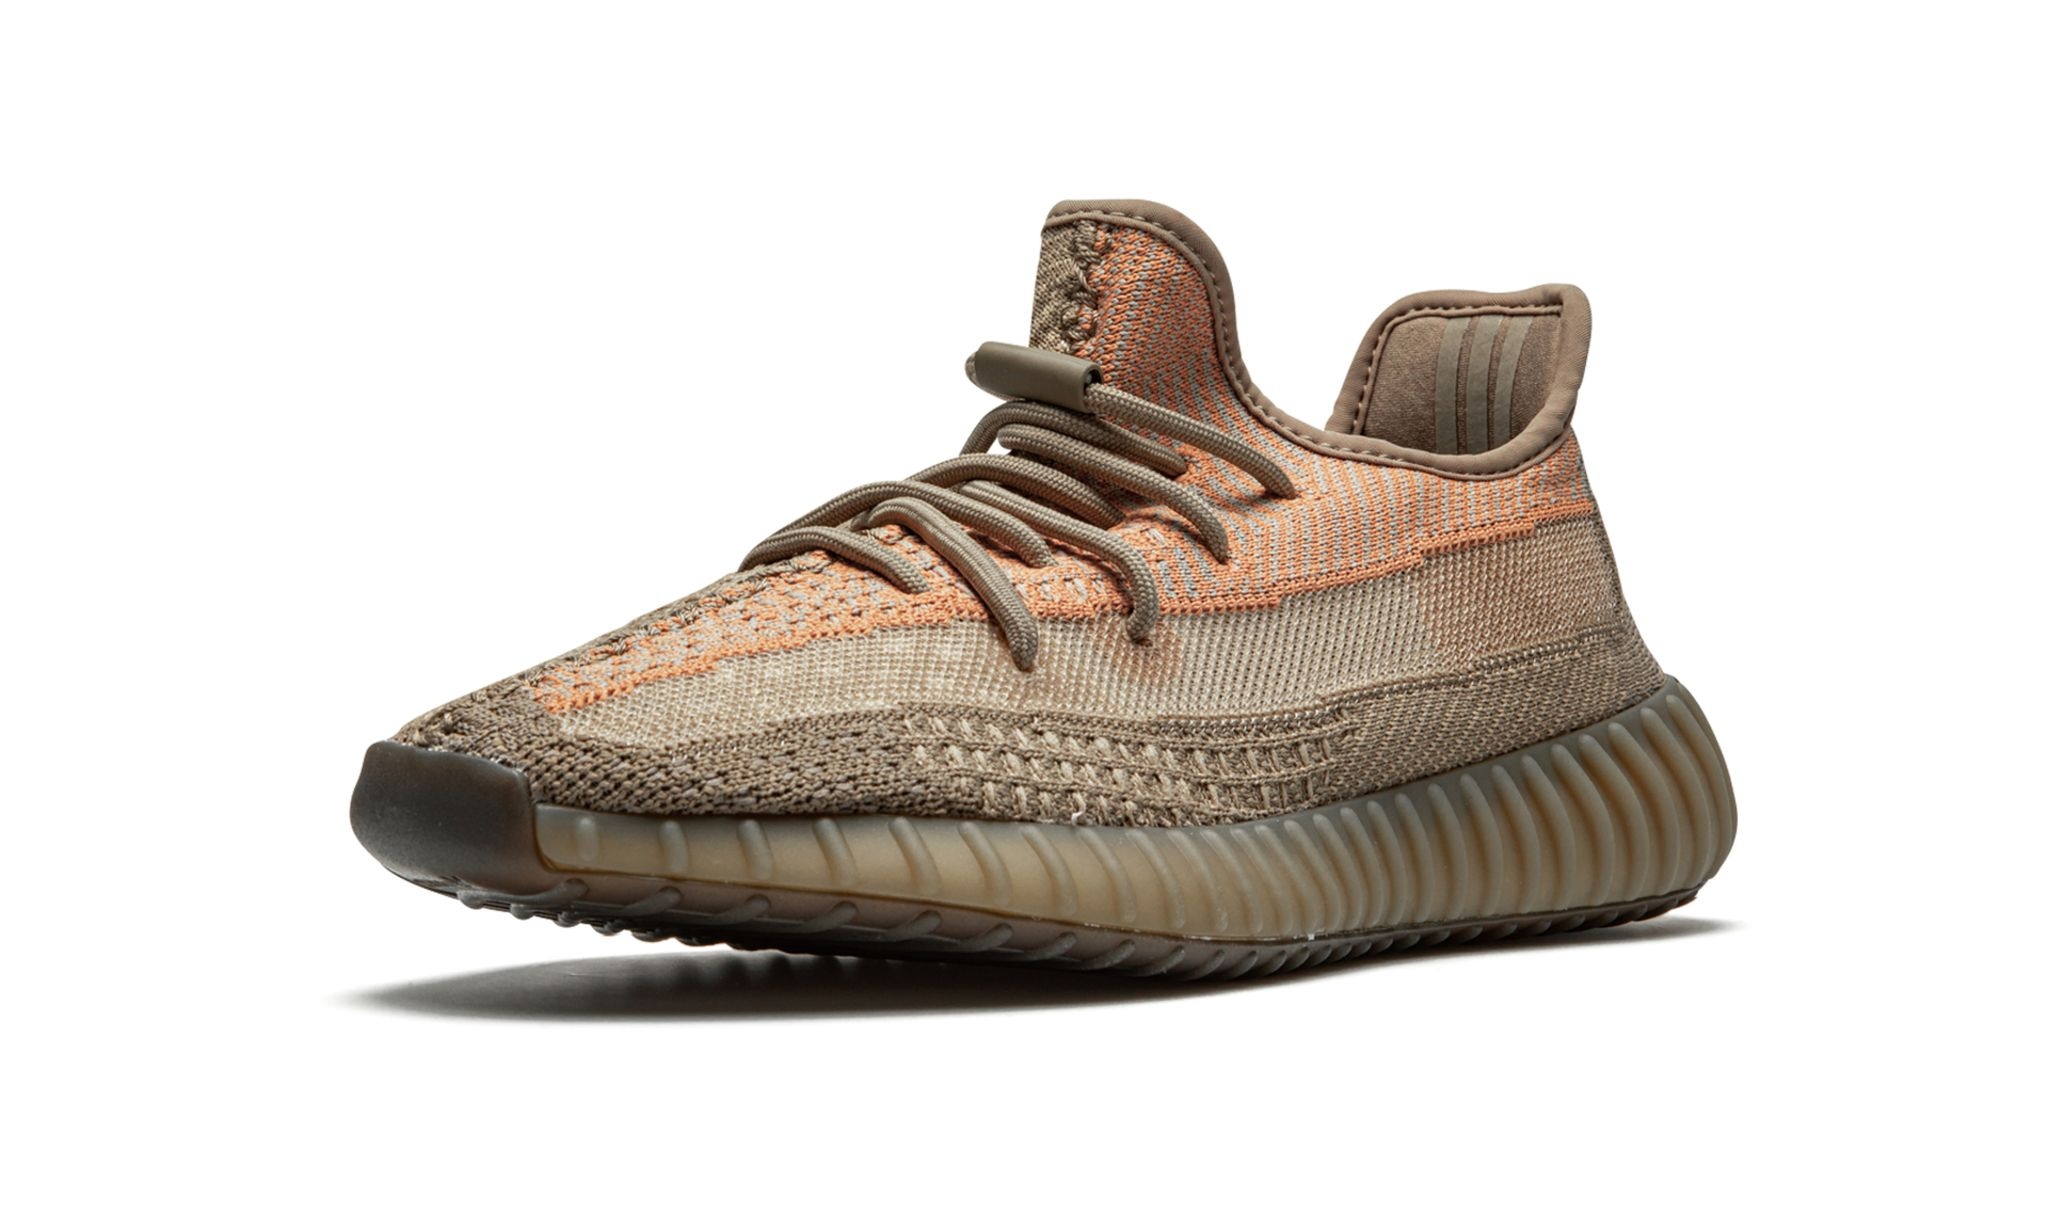 Yeezy Boost 350 V2 "Sand Taupe" - 4